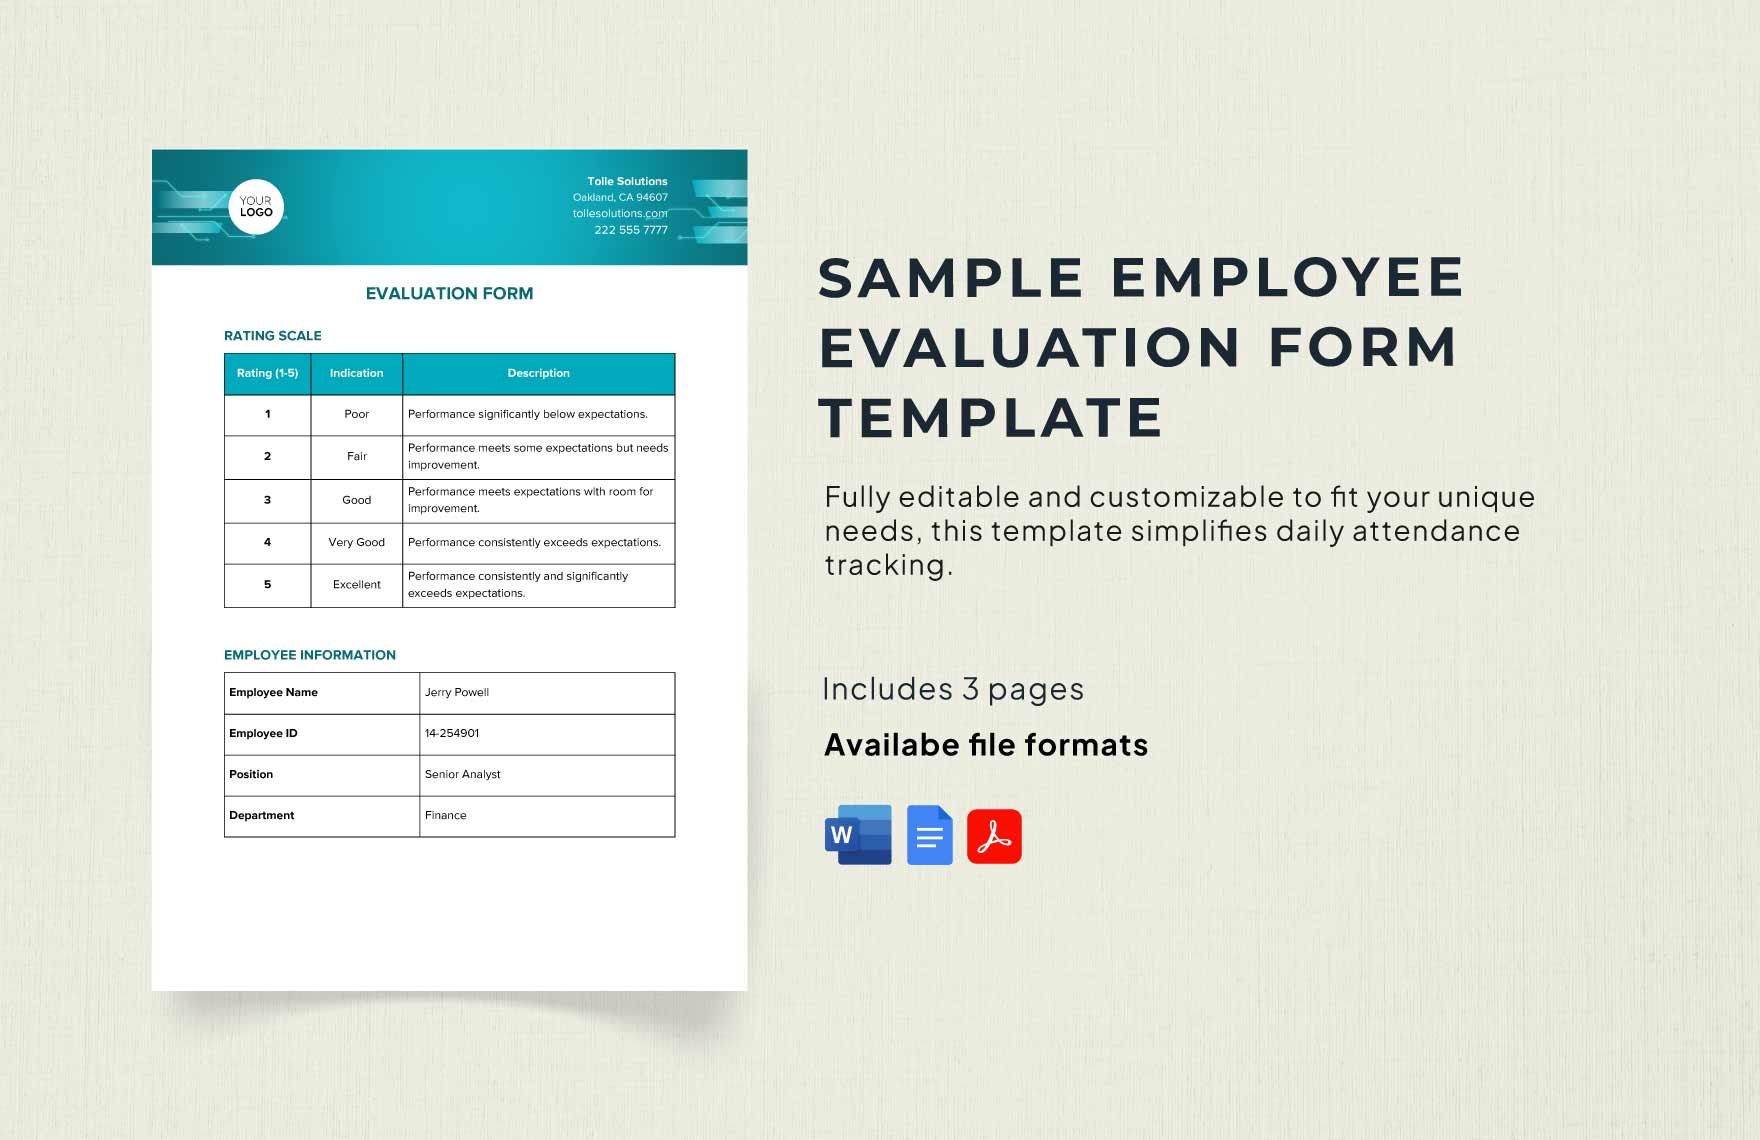 Free Sample Employee Evaluation Form Template in Word, Google Docs, PDF